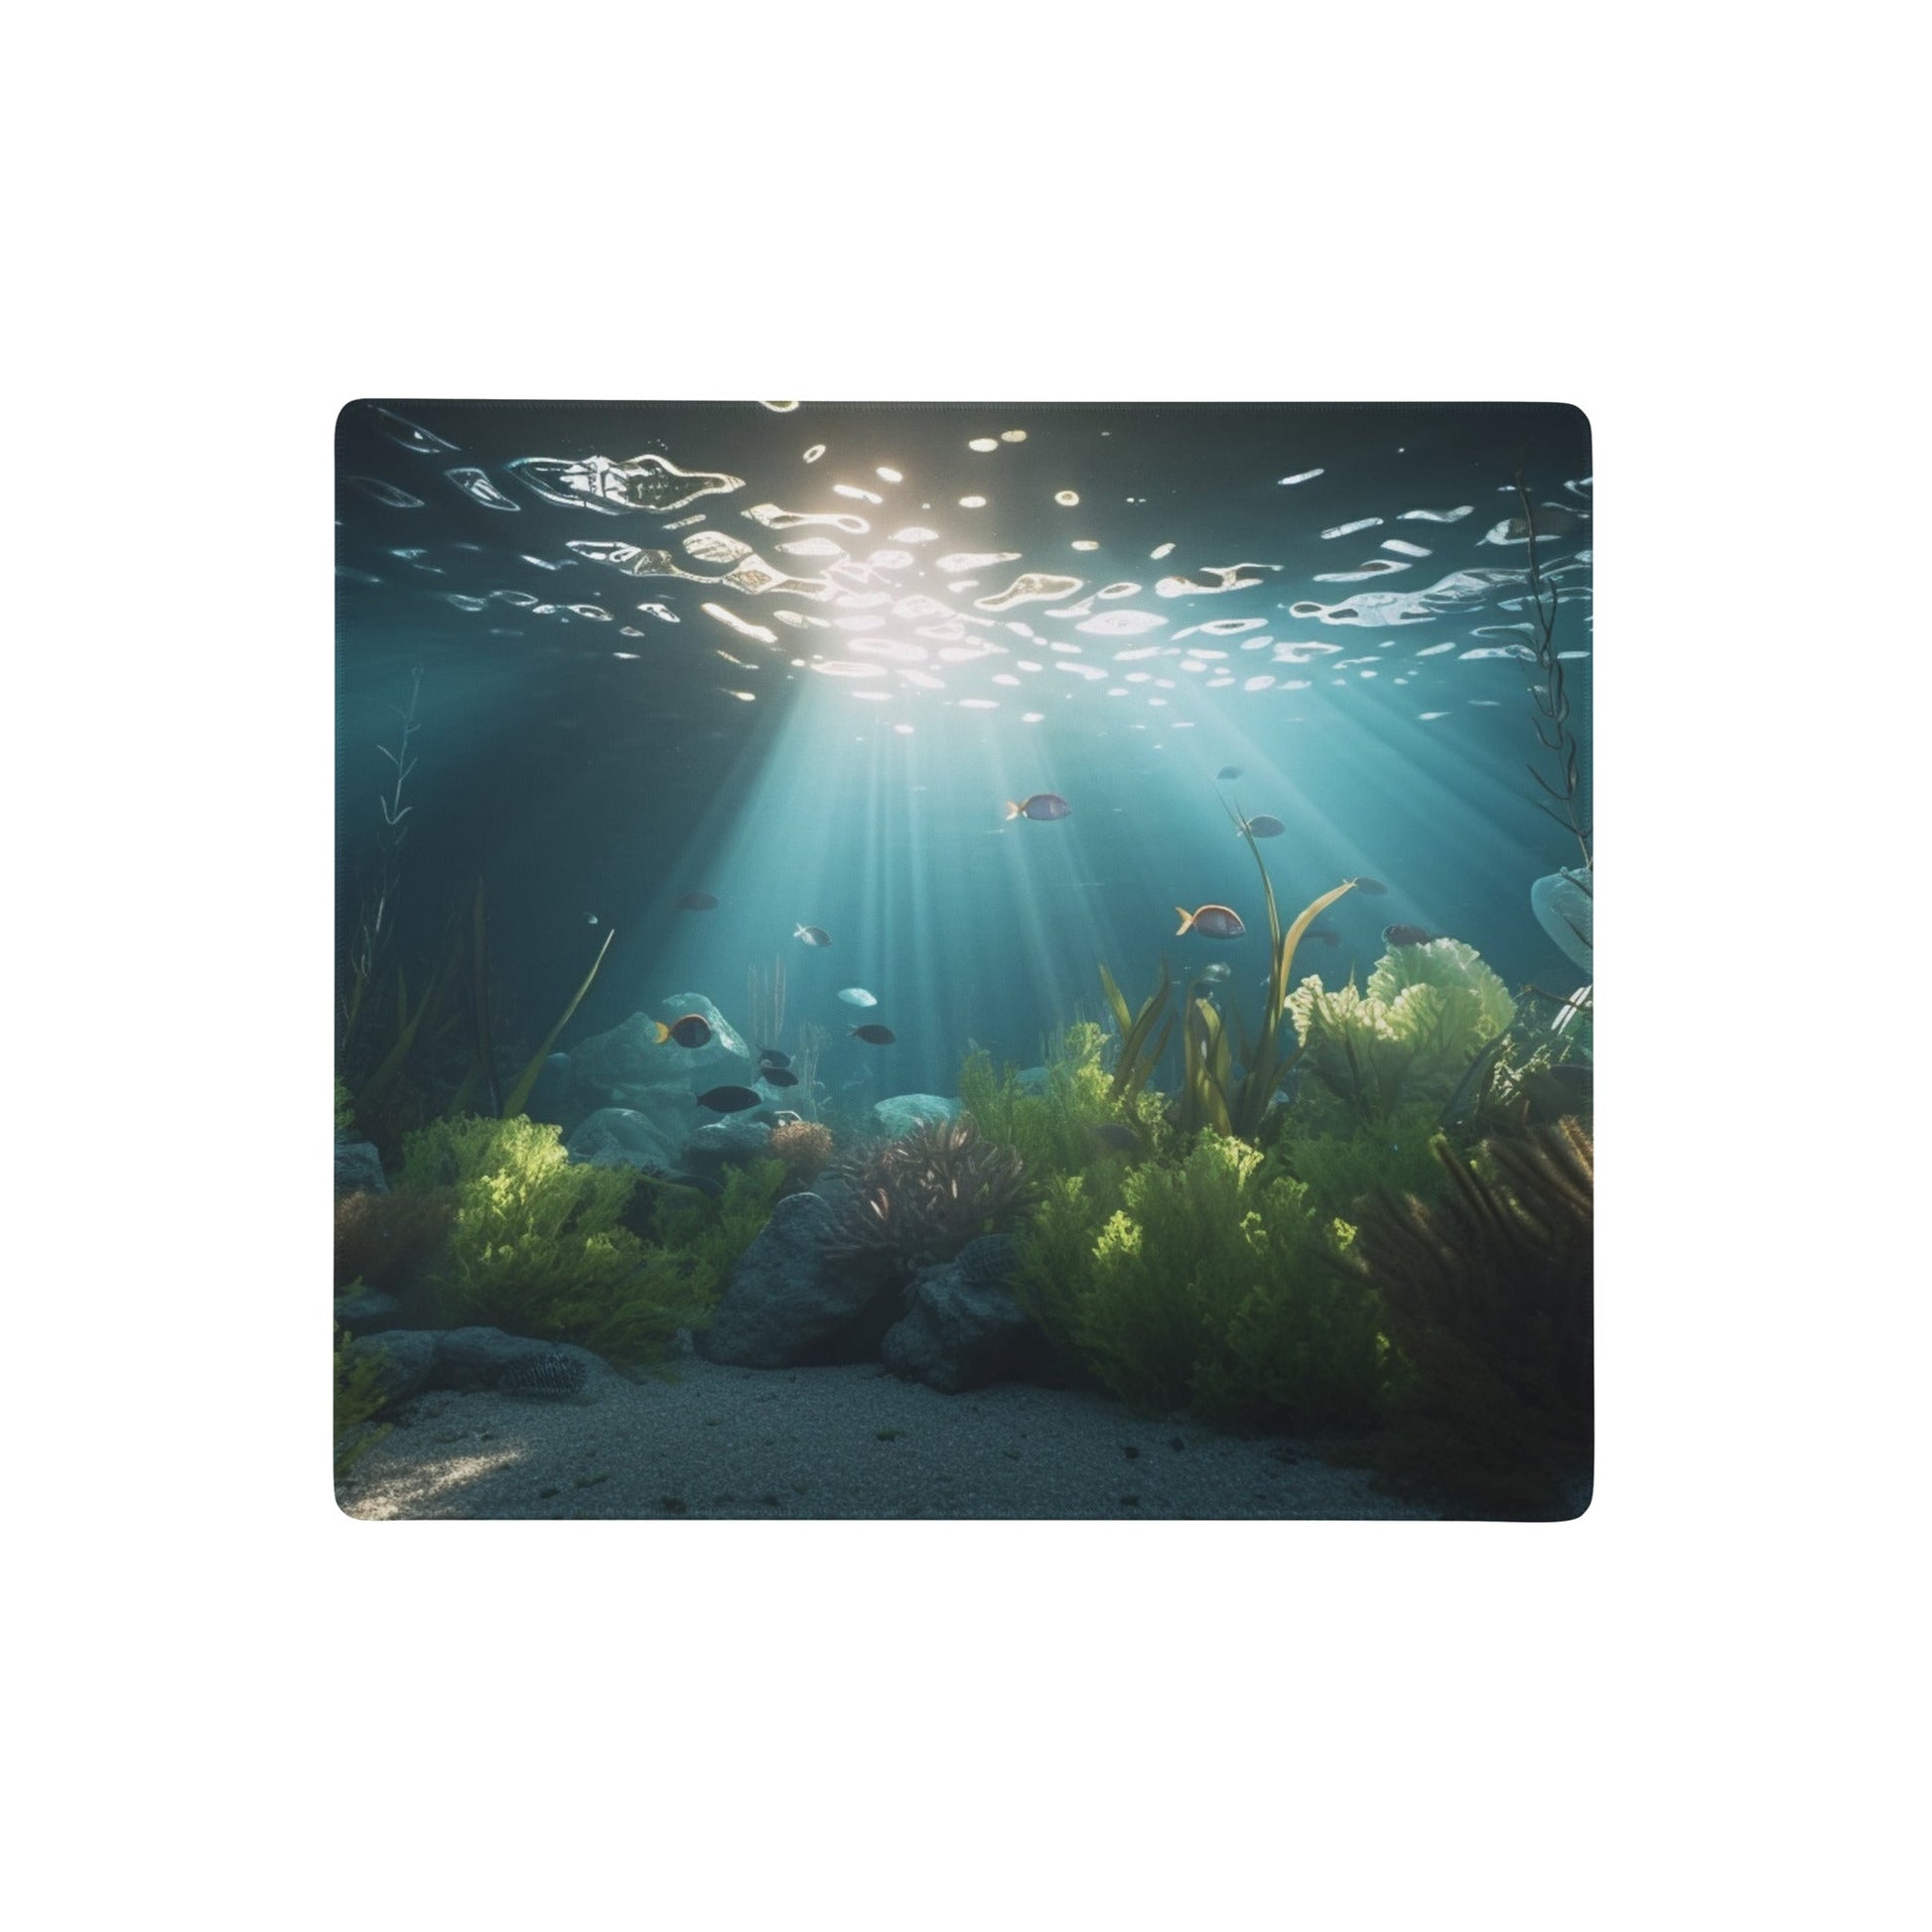 2 Shallow Underwater Landscape Gaming mouse pad by Neduz